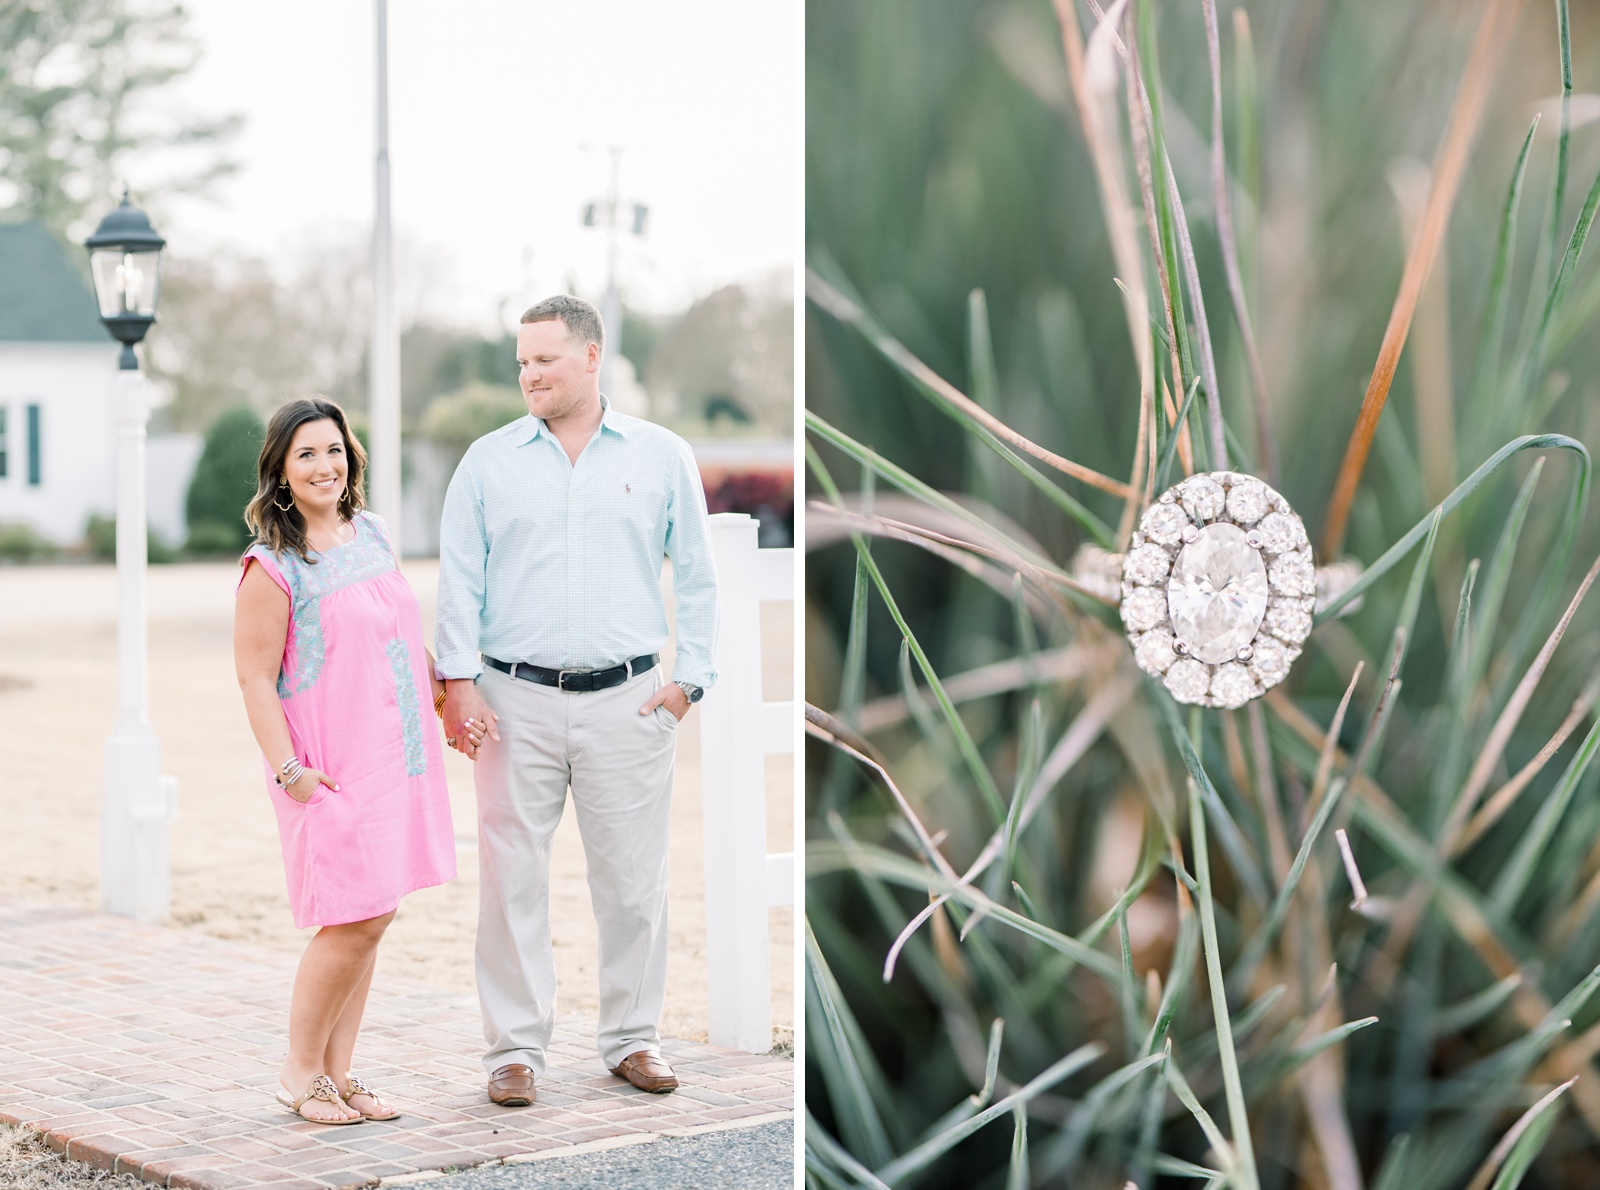 Indian Creek Yacht & Country Club wedding engagement session in Kilmarnock Virginia. Beautiful golden light and spring foliage!